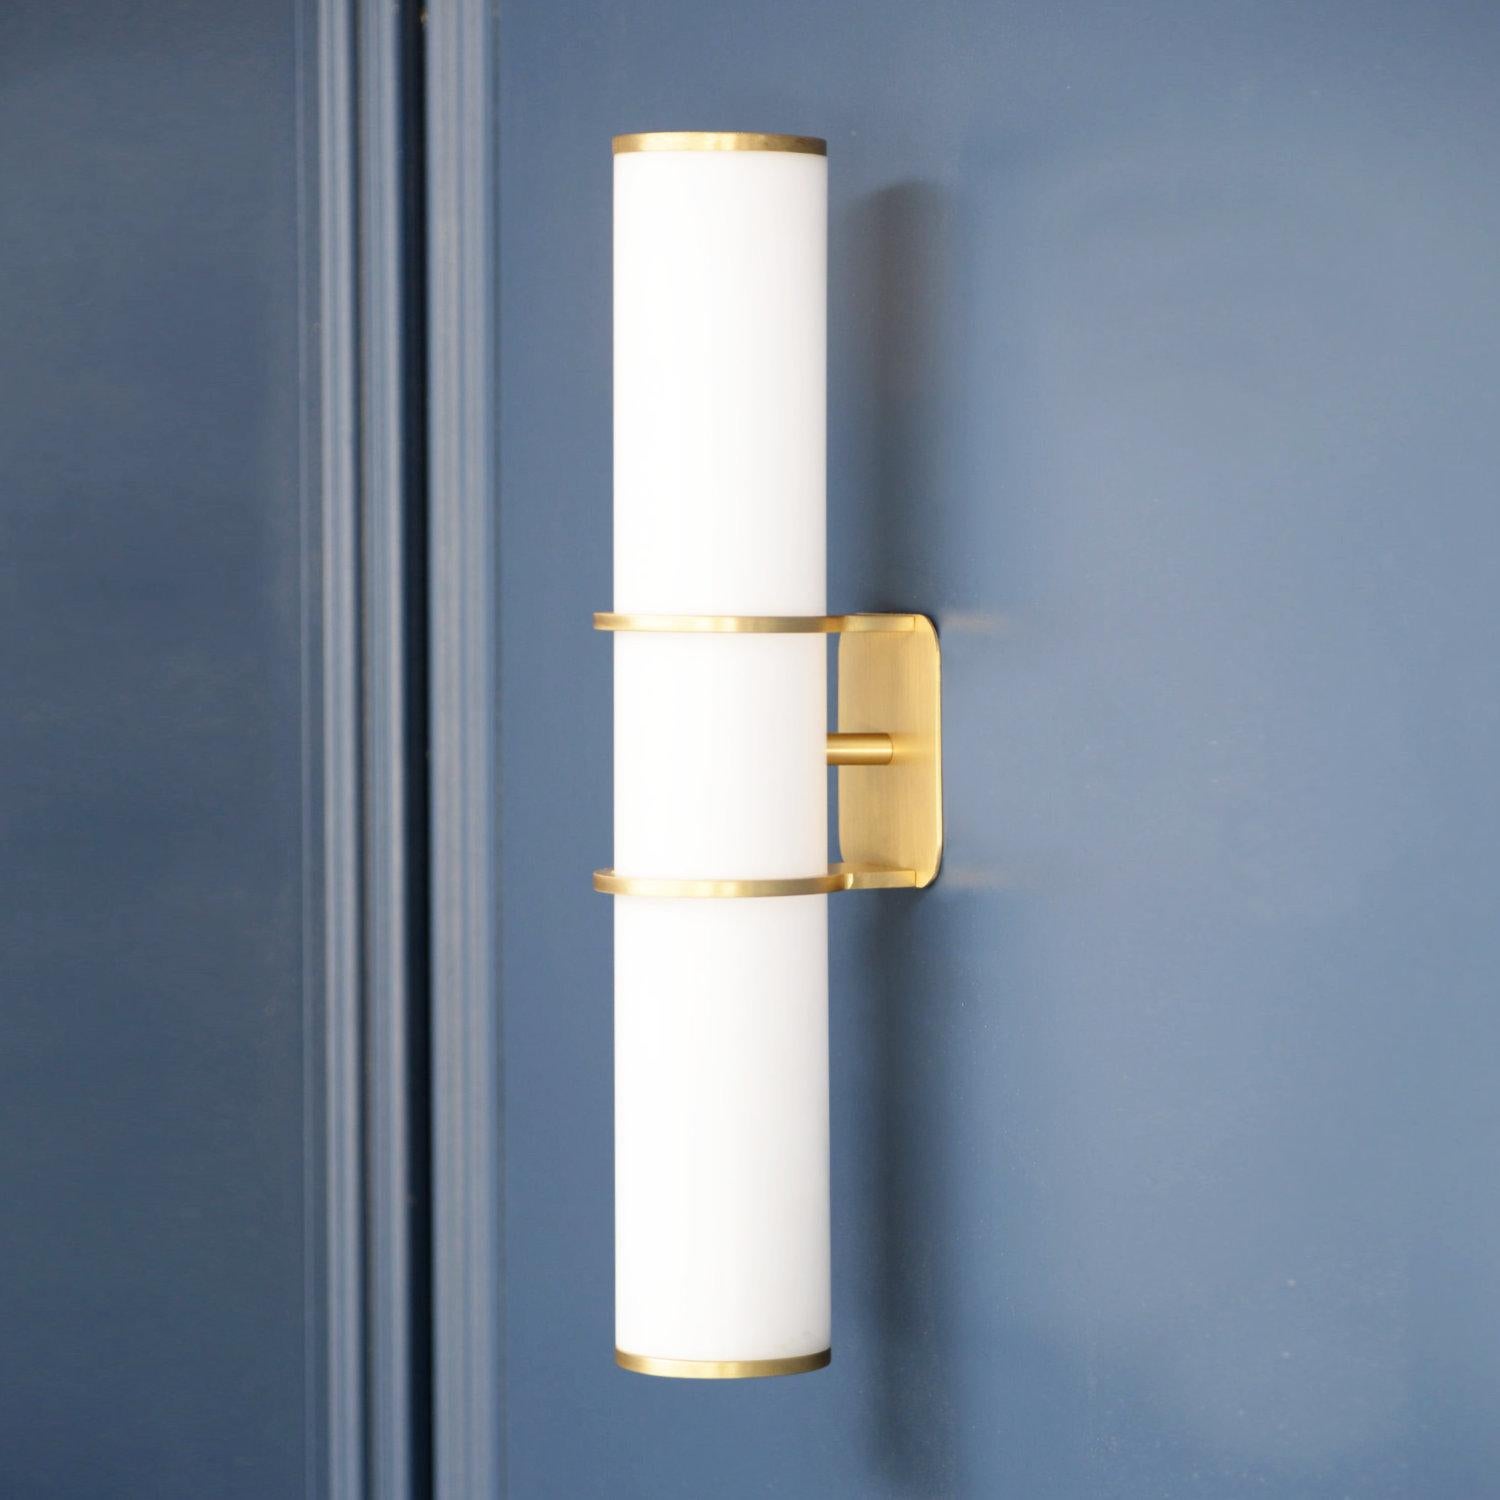 British LUCERNA Modern Wall Light in Brushed Brass, IP44 Rated, Made in Britain For Sale